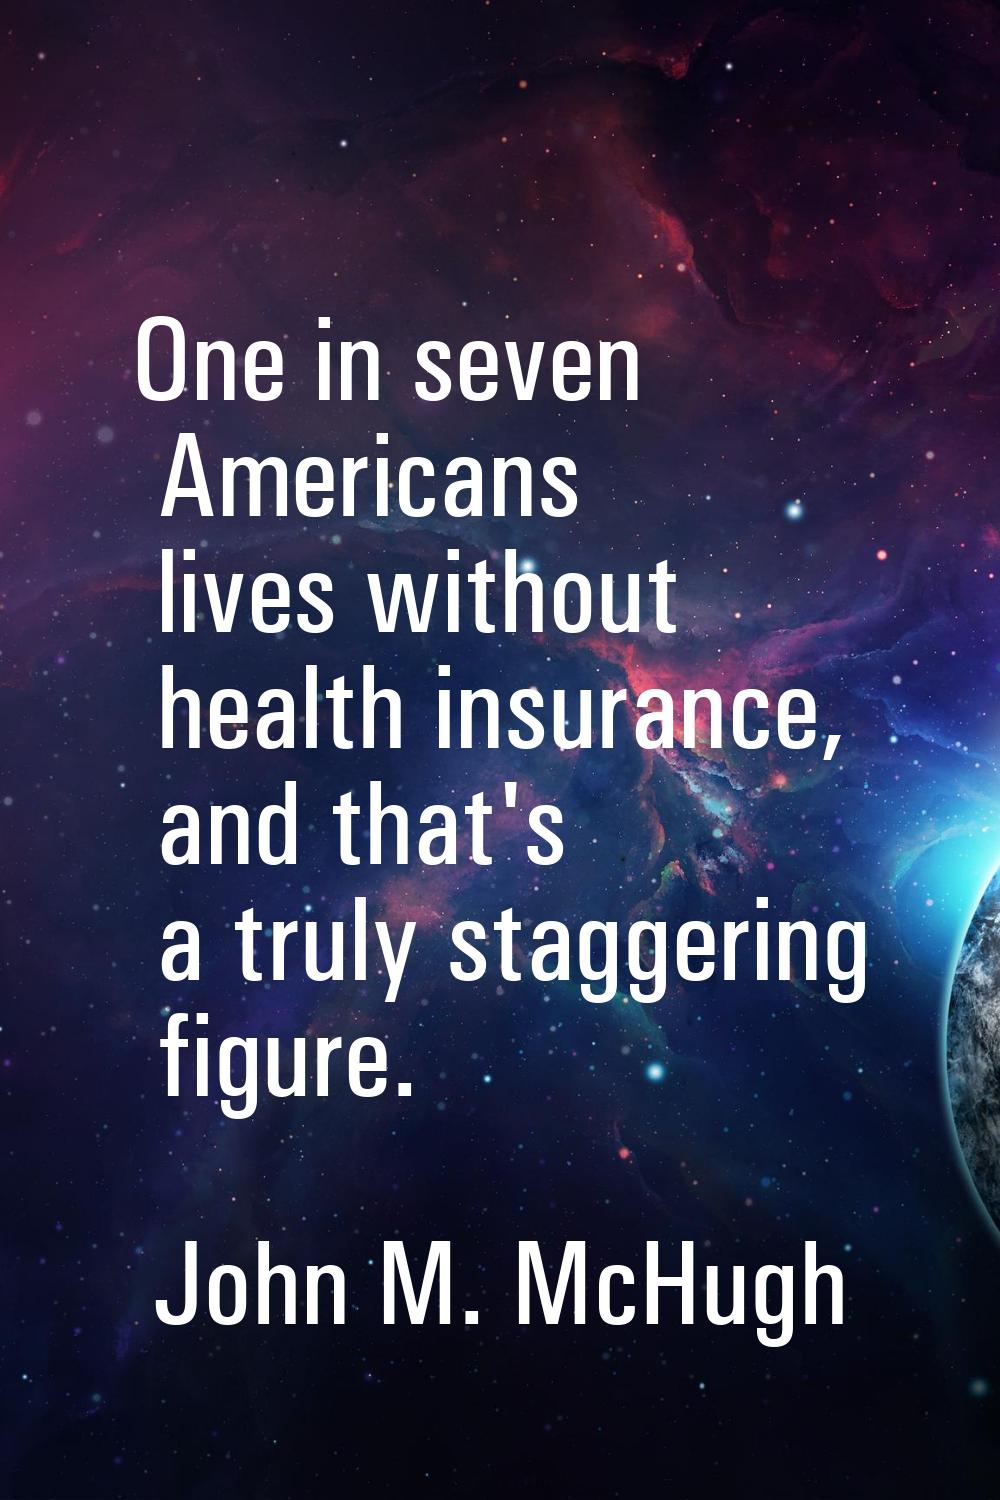 One in seven Americans lives without health insurance, and that's a truly staggering figure.